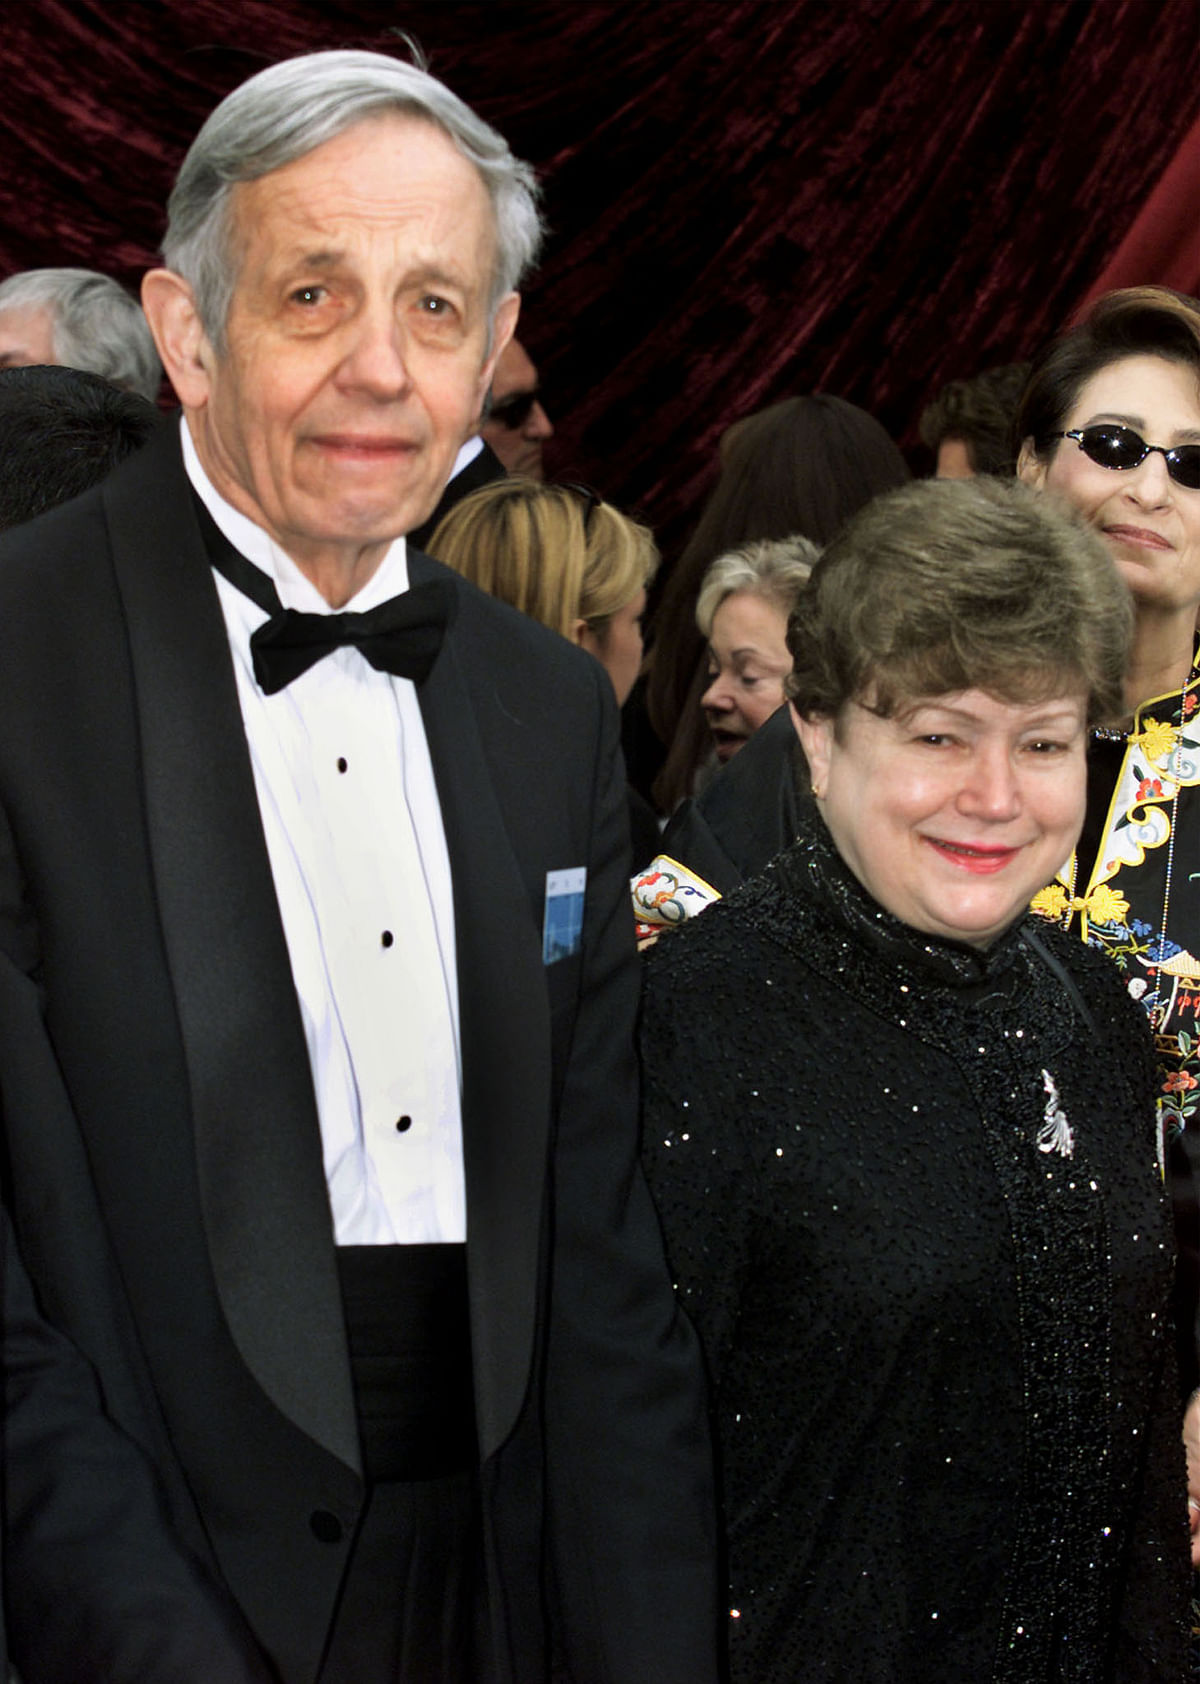 

John Nash, whose life was the subject of the film A Beautiful Mind was killed in a car crash along with his wife.